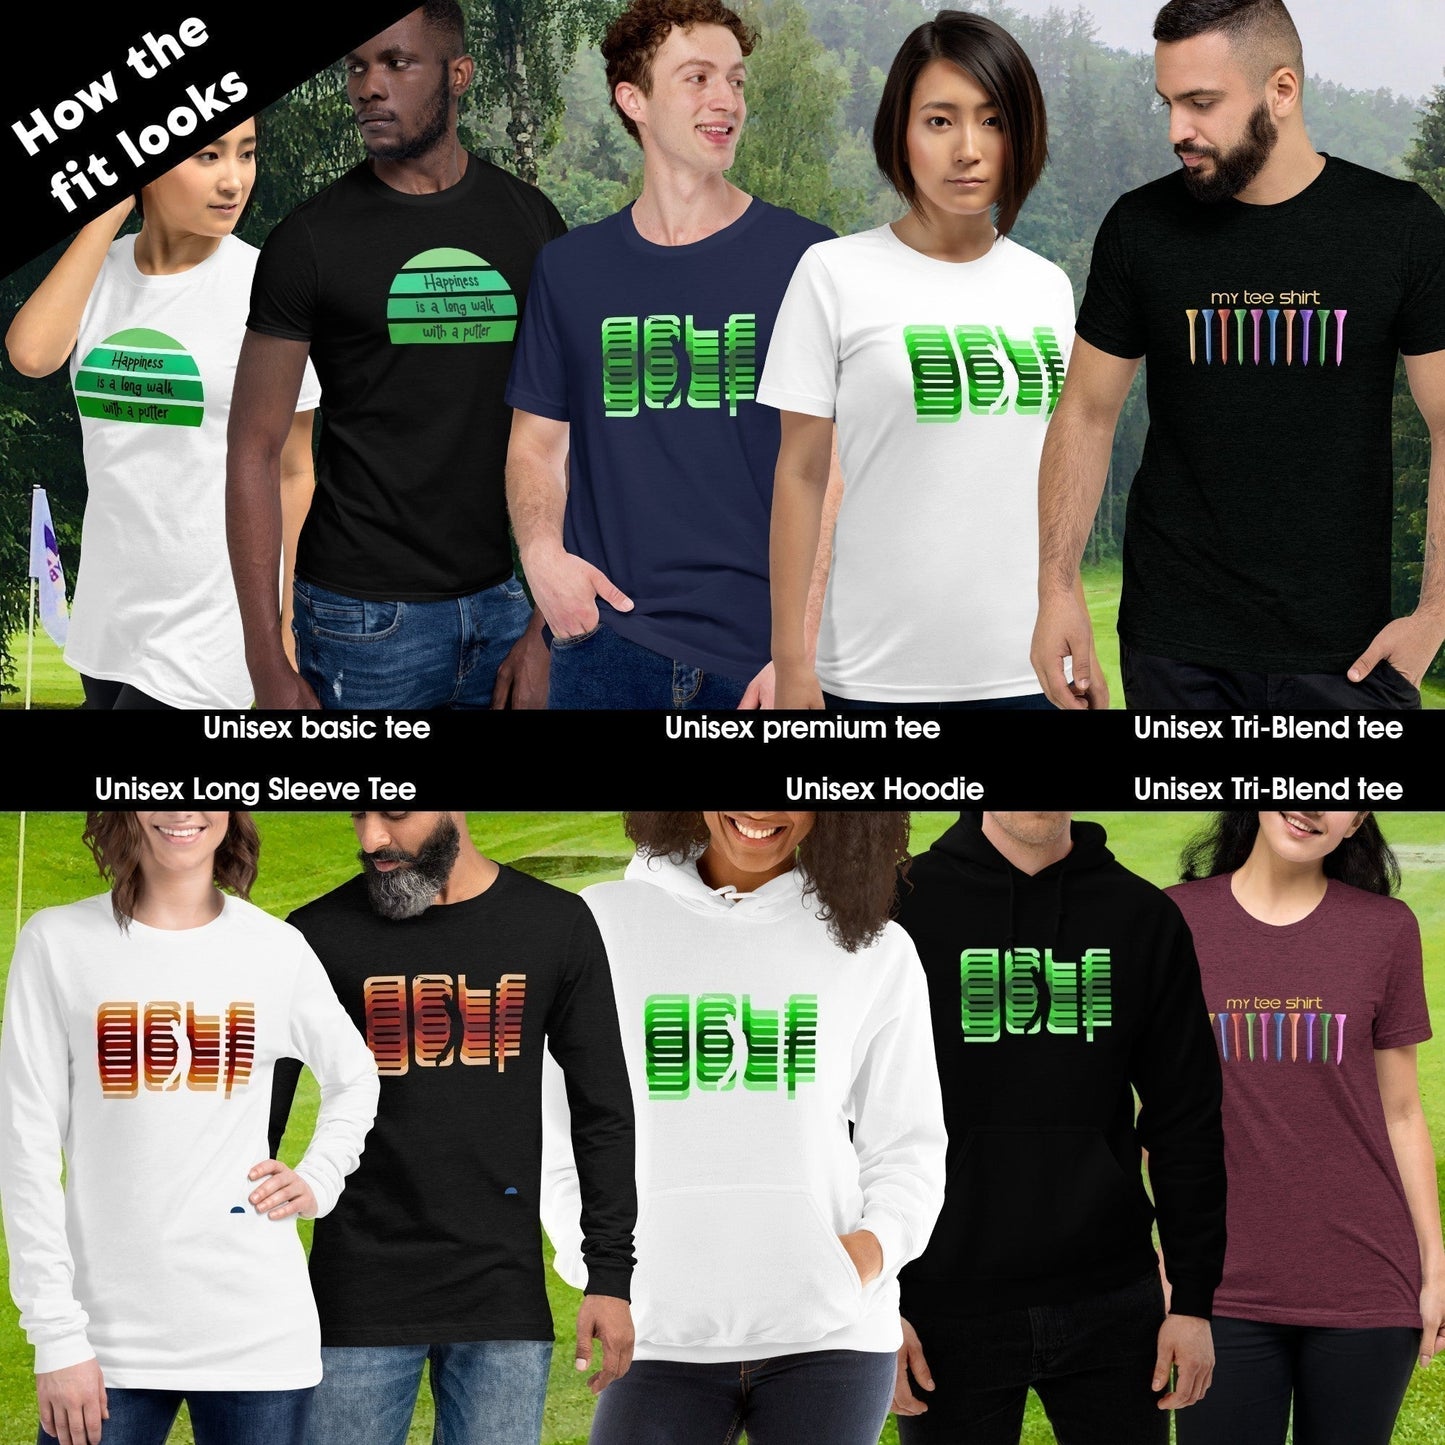 Golf Is Importanter Golf TShirt and Hoodie is a Creative Golf Graphic design for Men and Women